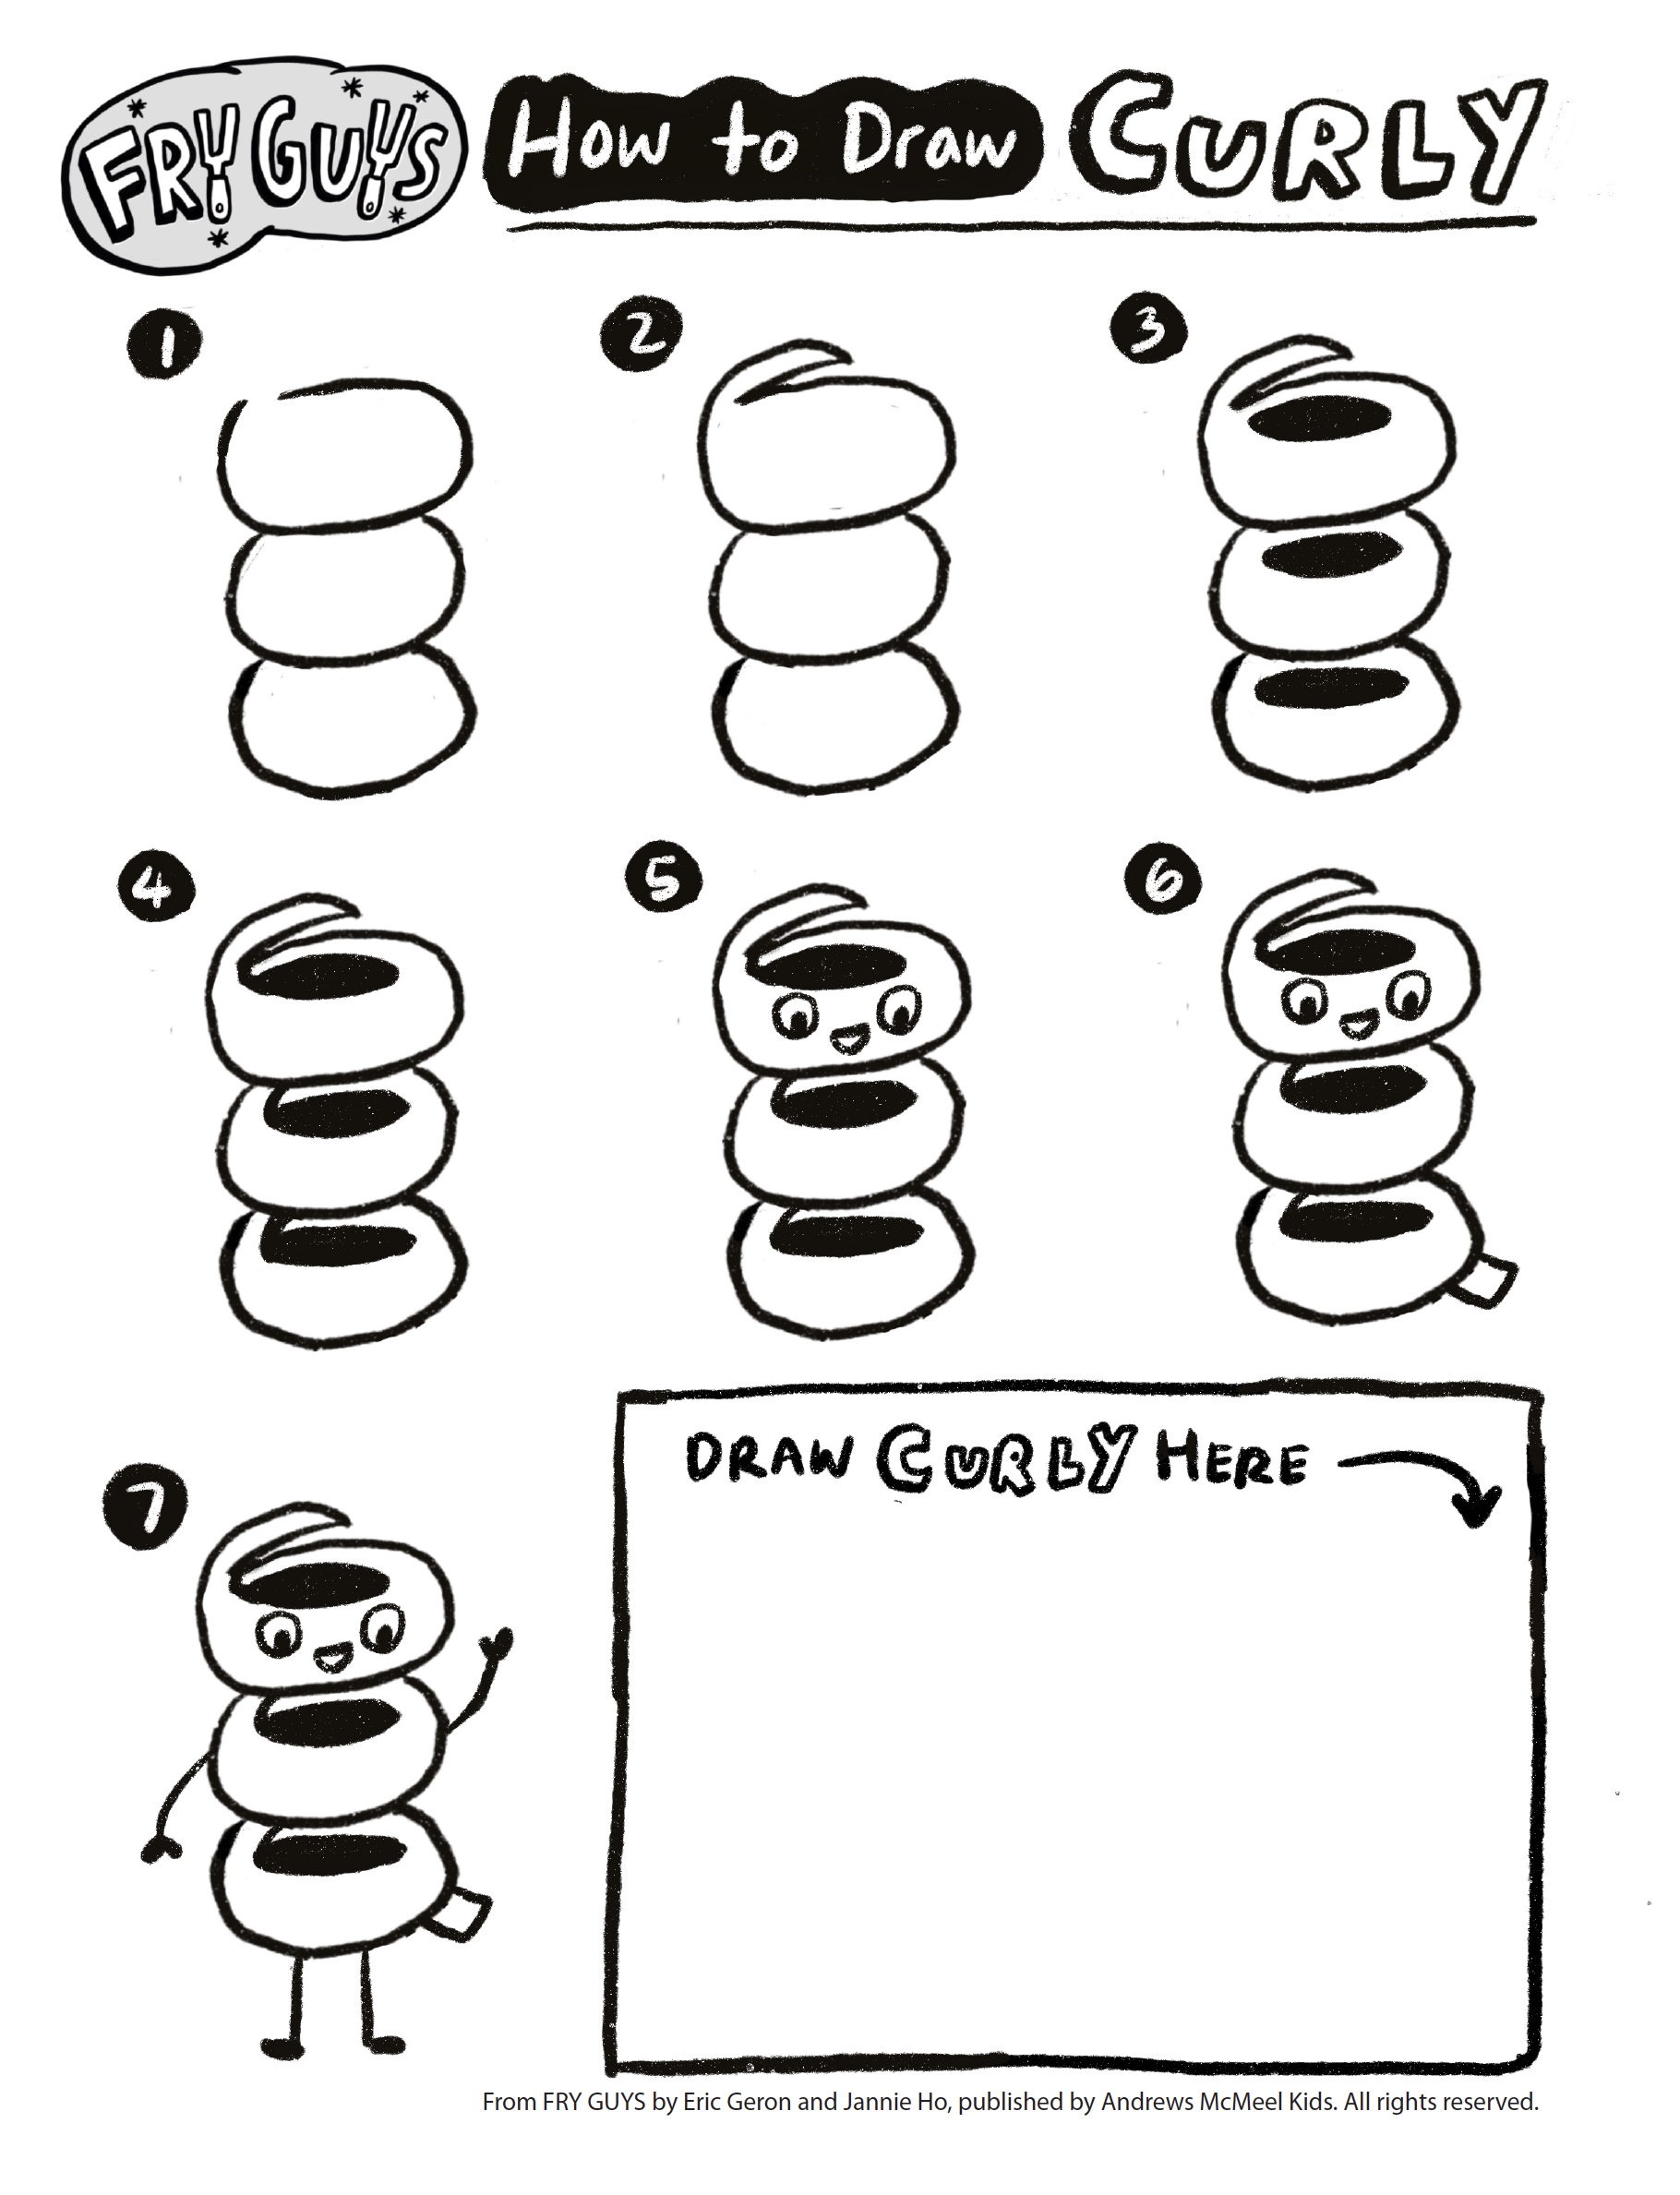 FRY GUYS- How to Draw Curly